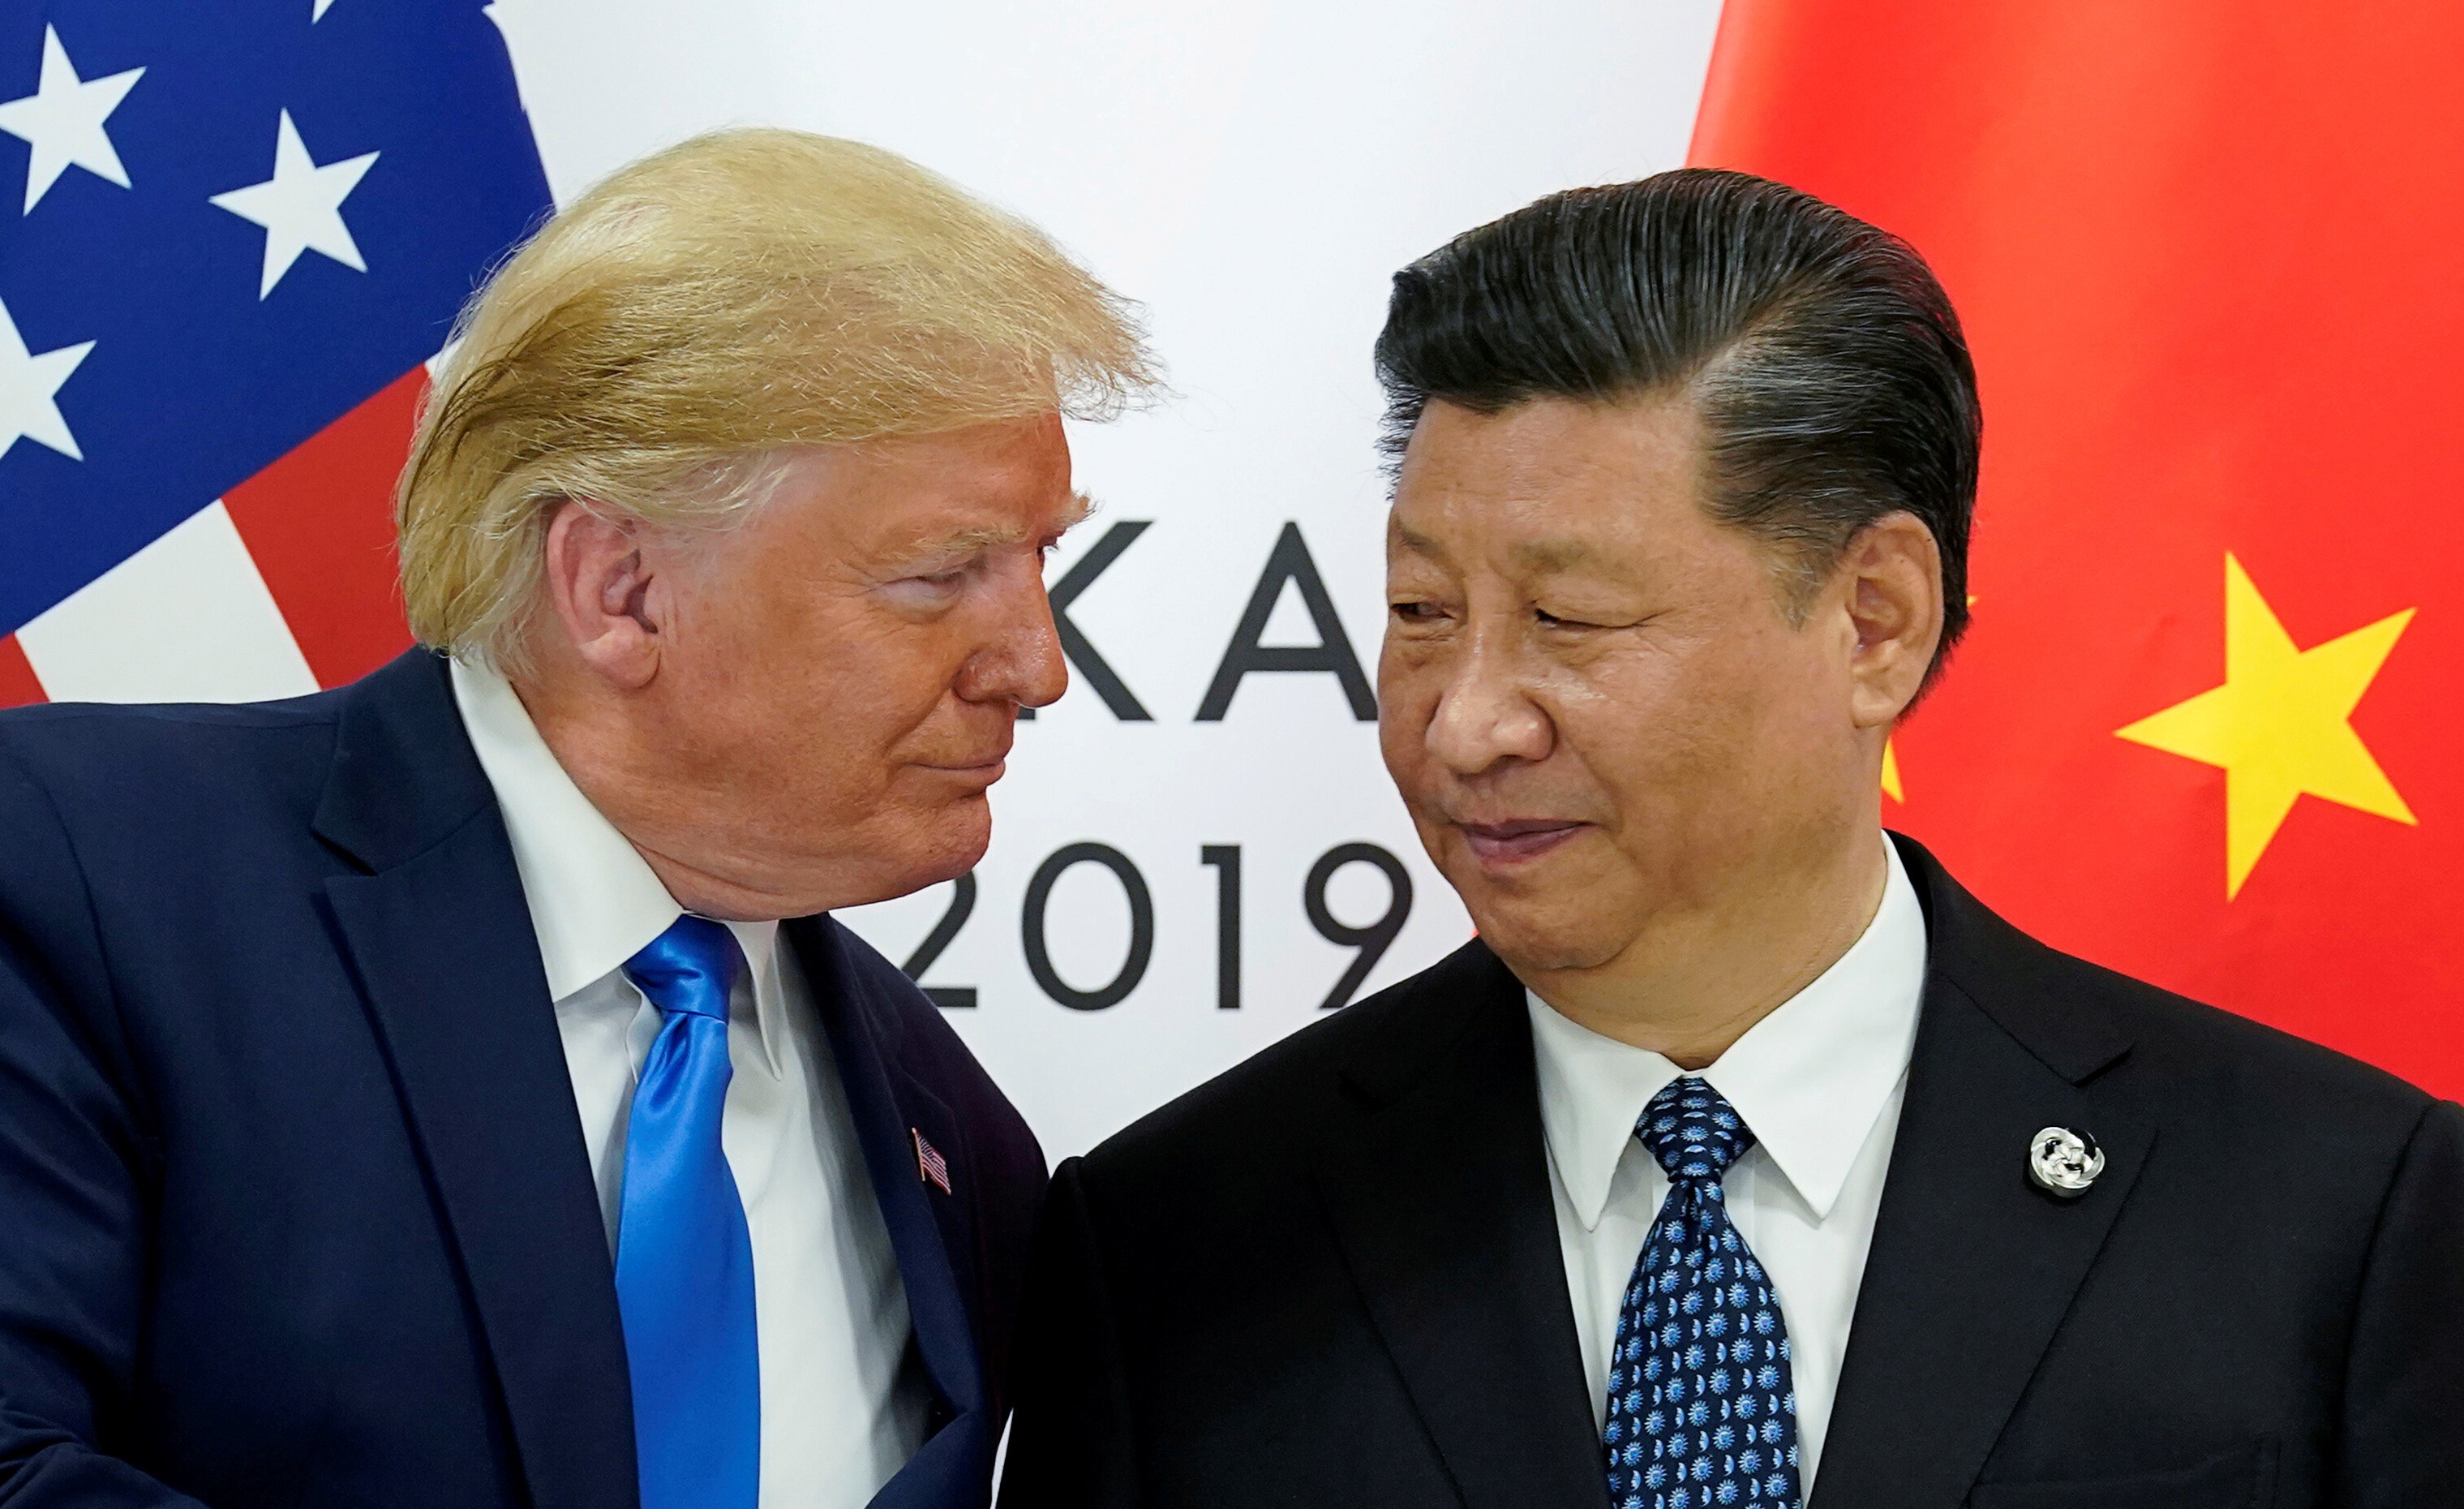 US President Donald Trump meets China's President Xi Jinping at a G20 summit in Japan last year. Photo: Reuters